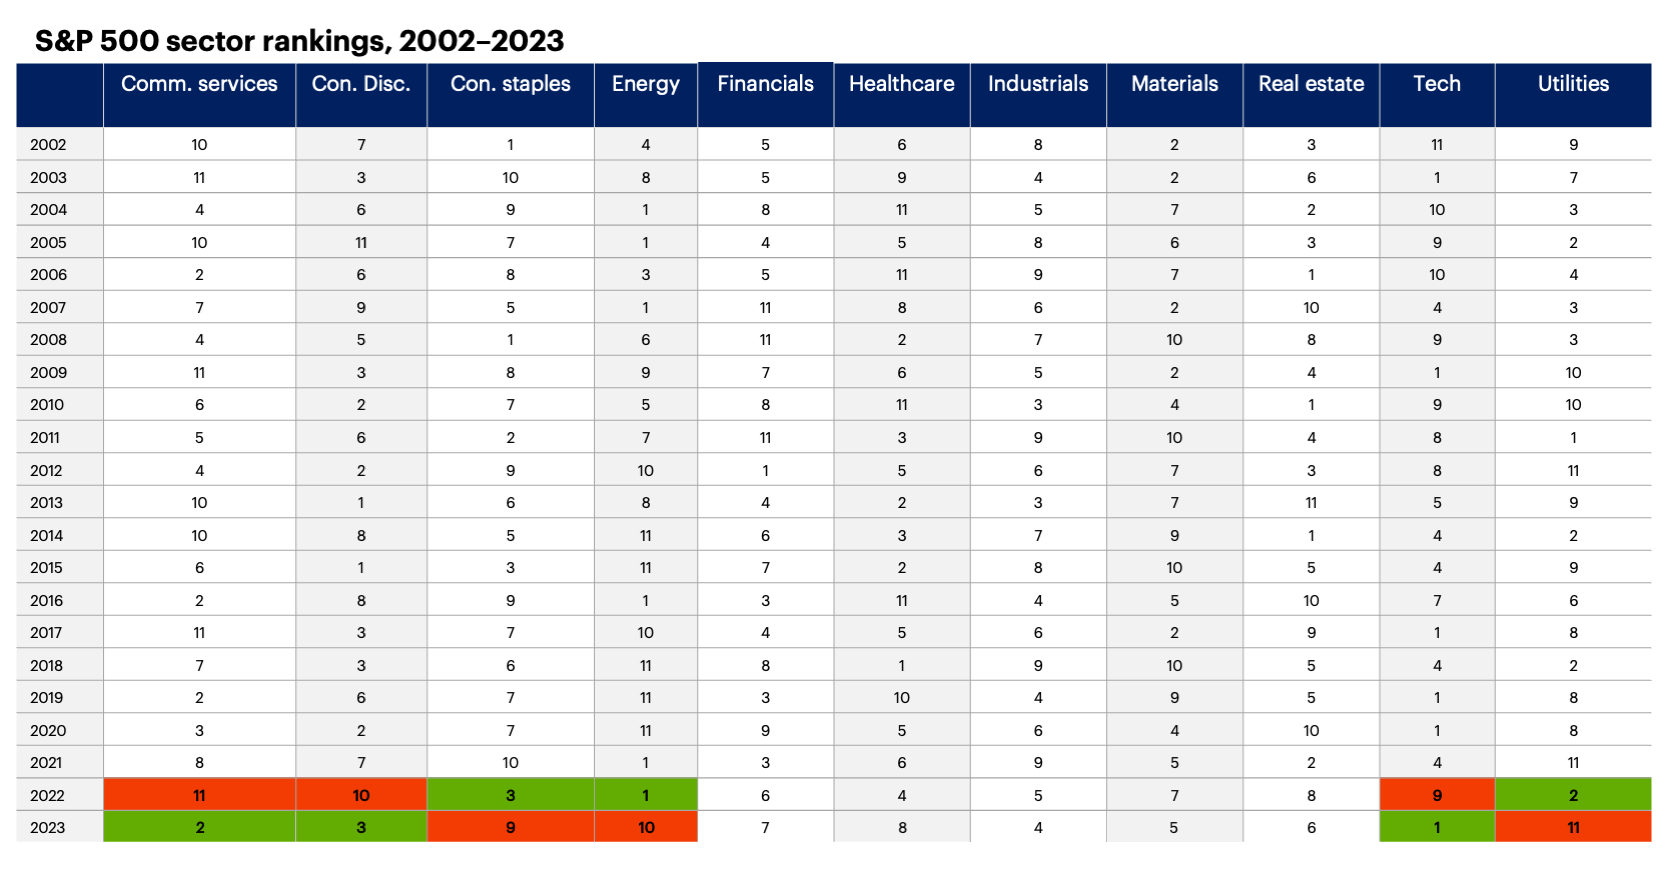 Chart 1: S&P 500 sector rankings, 2002-2023